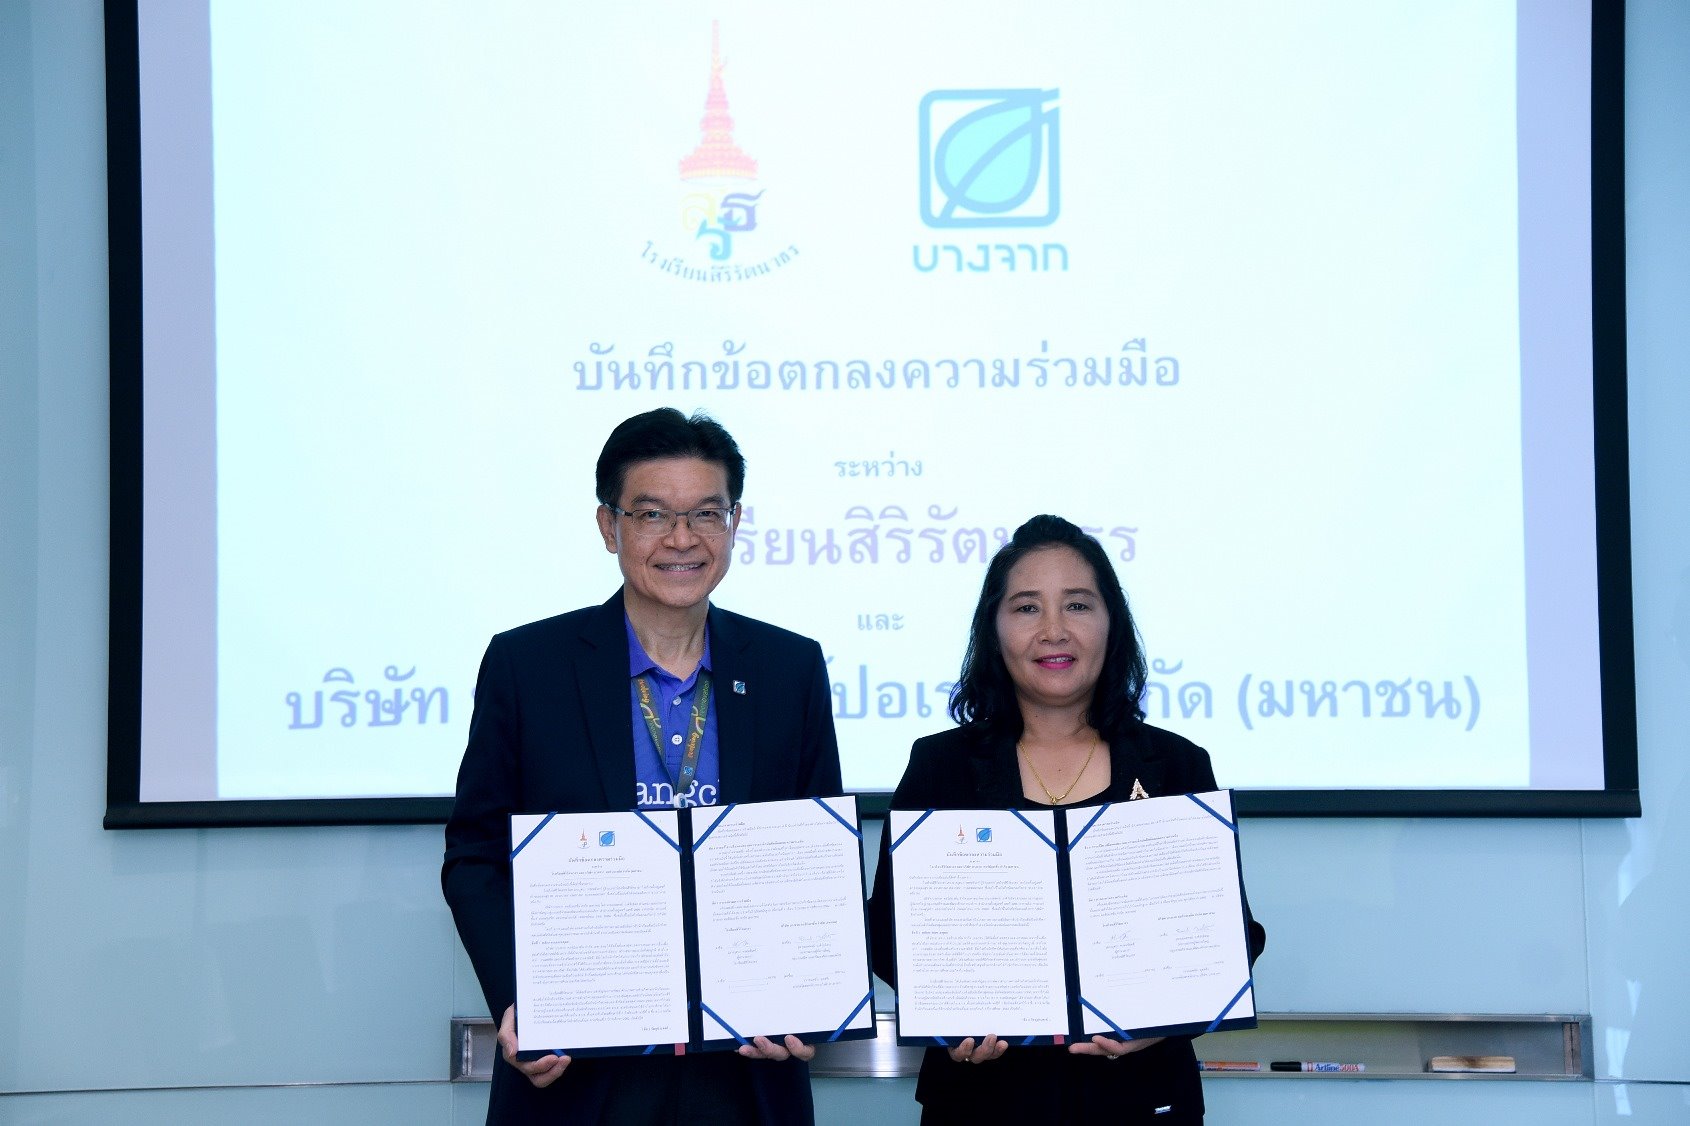 Bangchak and Sirirattanathorn School Join Forces for Youth Development